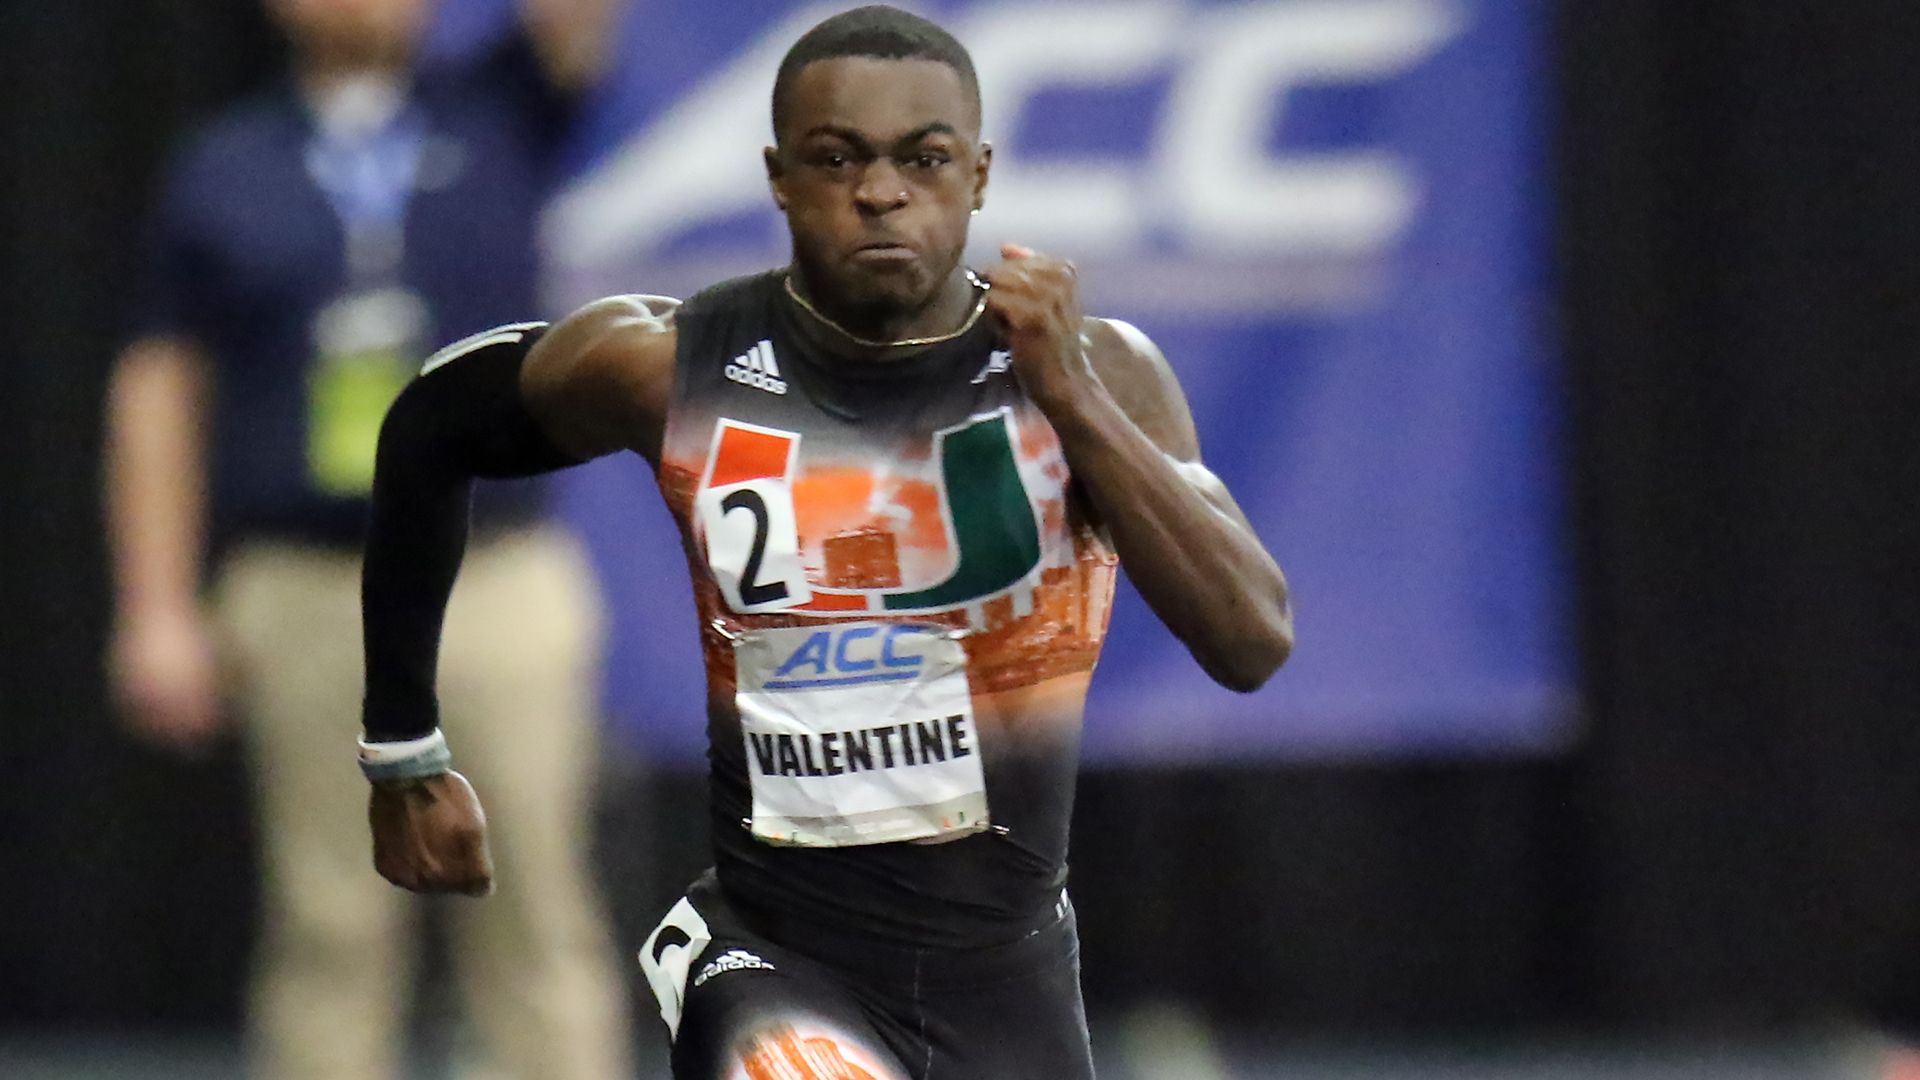 Sprinters Shine on Day 2 at Power 5 Invitational